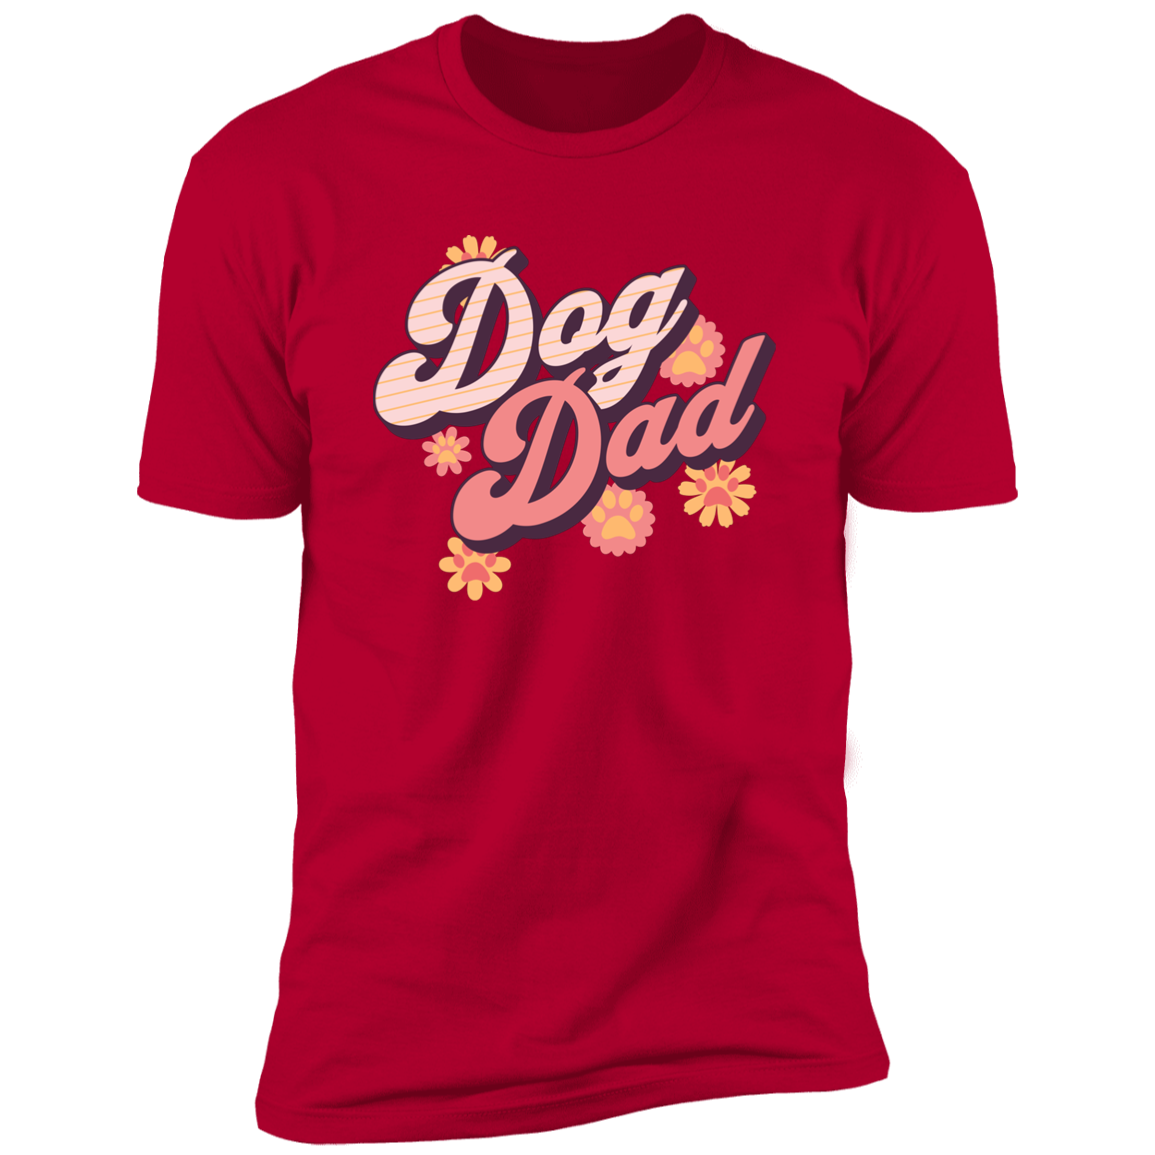 Retro Dog Dad t-shirt, Dog dad shirt, Dog T-shirt for humans, in red